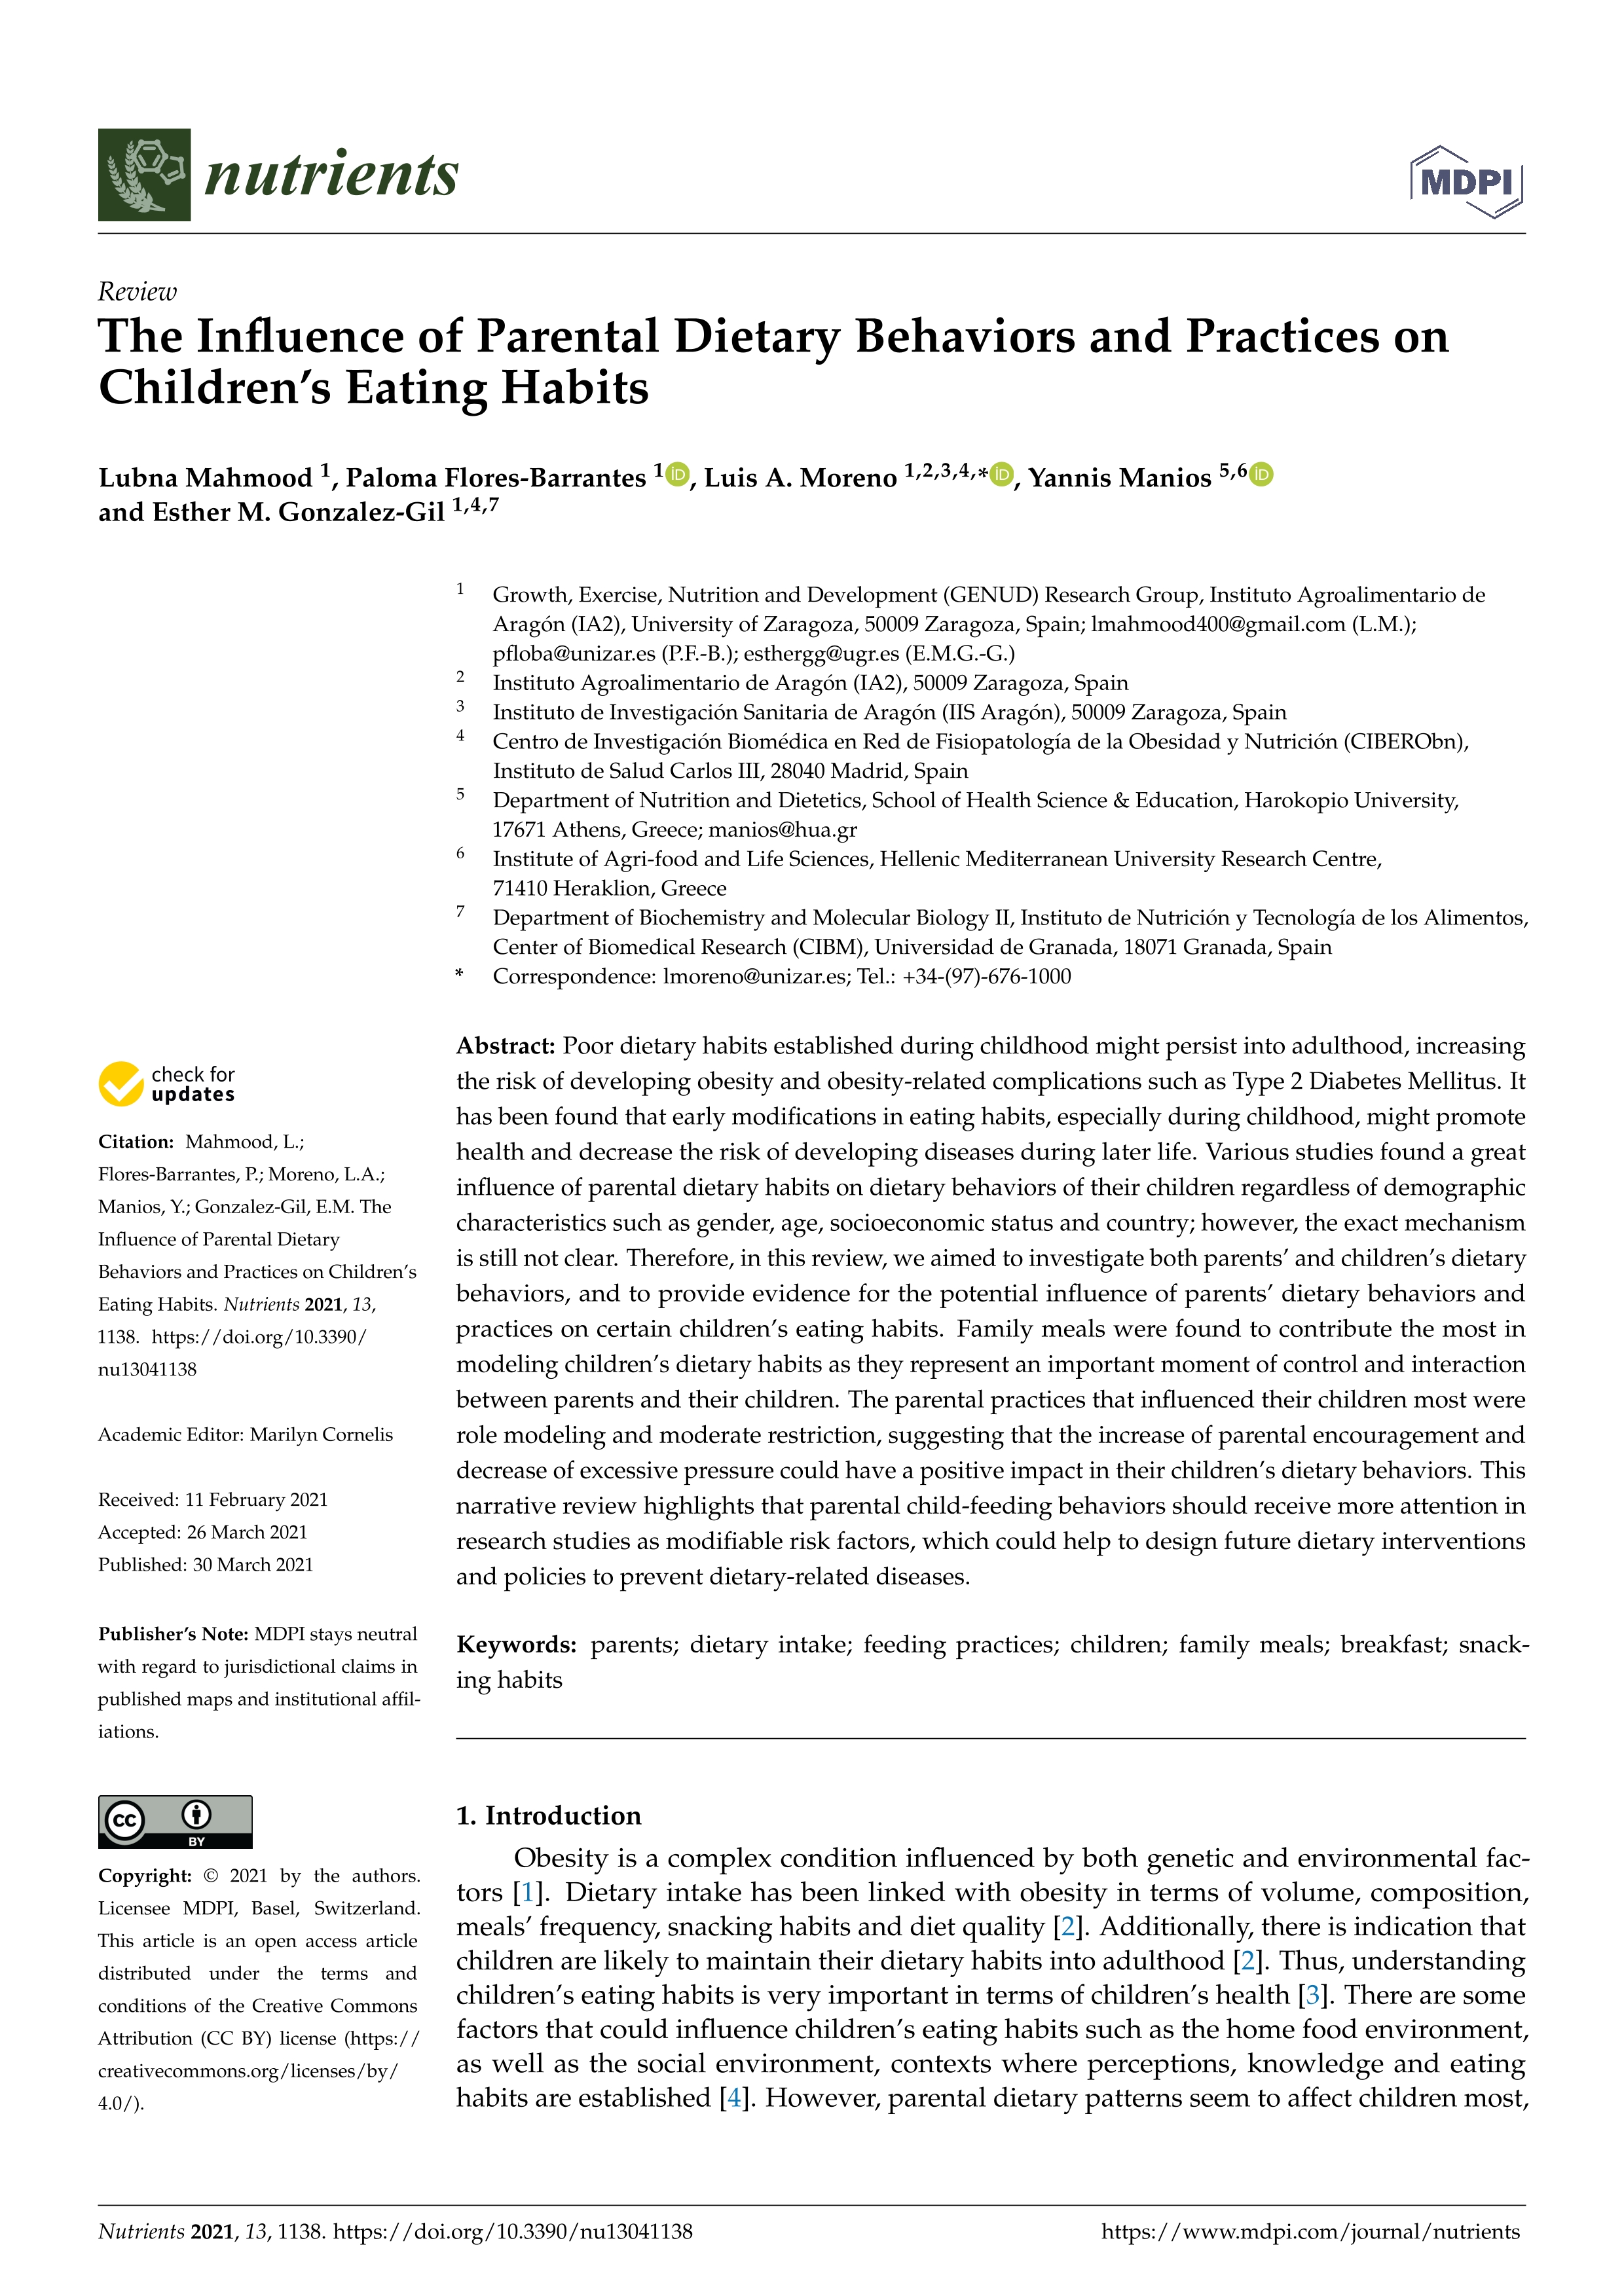 The influence of parental dietary behaviors and practices on children’s eating habits